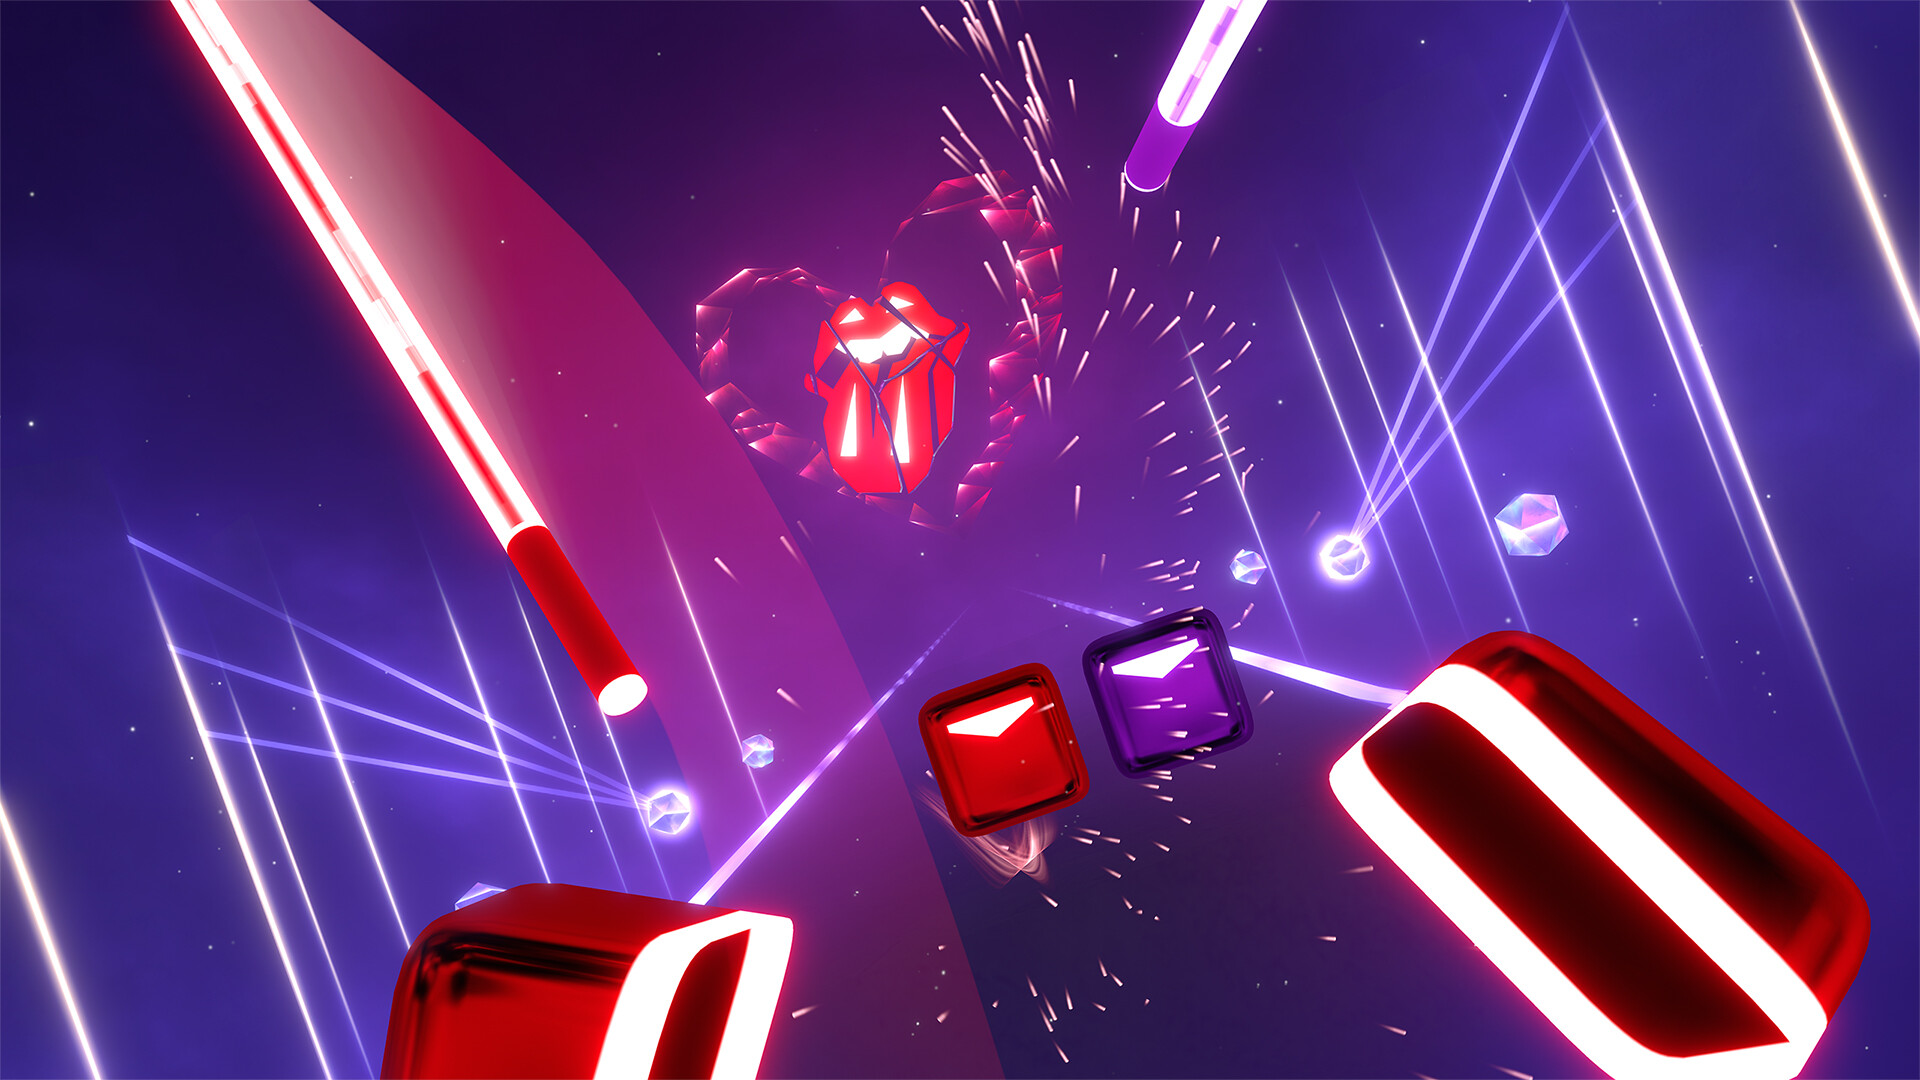 Beat Saber - The Rolling Stones - "Whole Wide World" Featured Screenshot #1